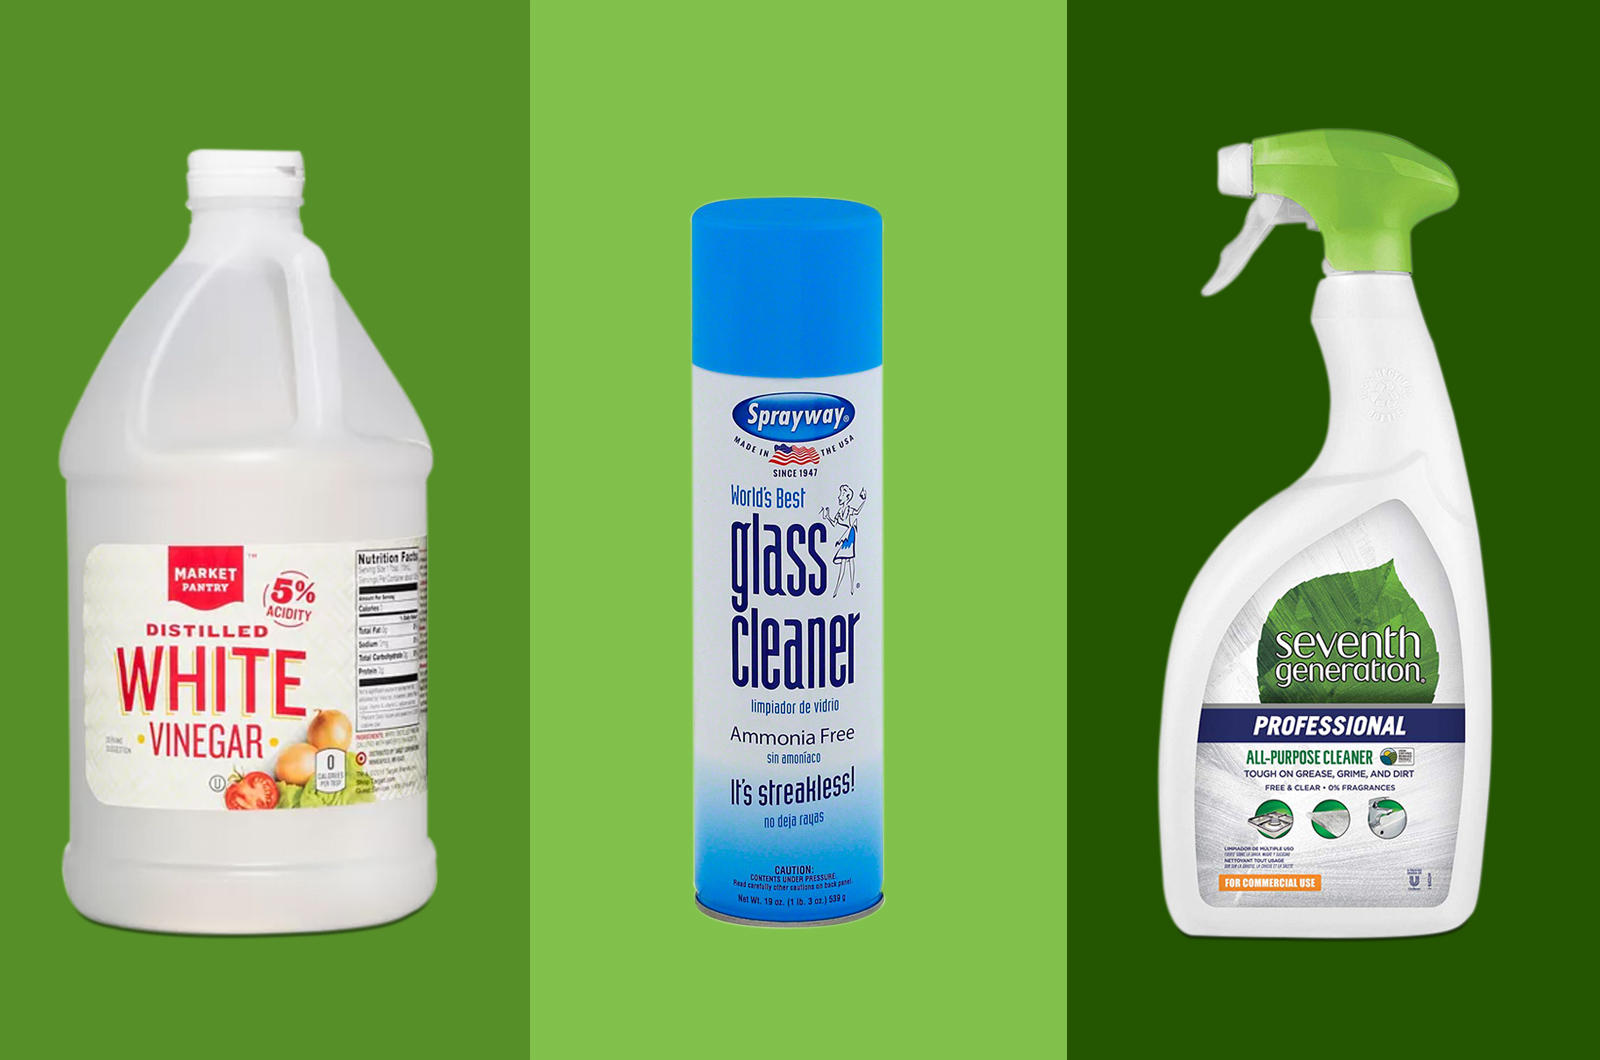 Hd cleaning products